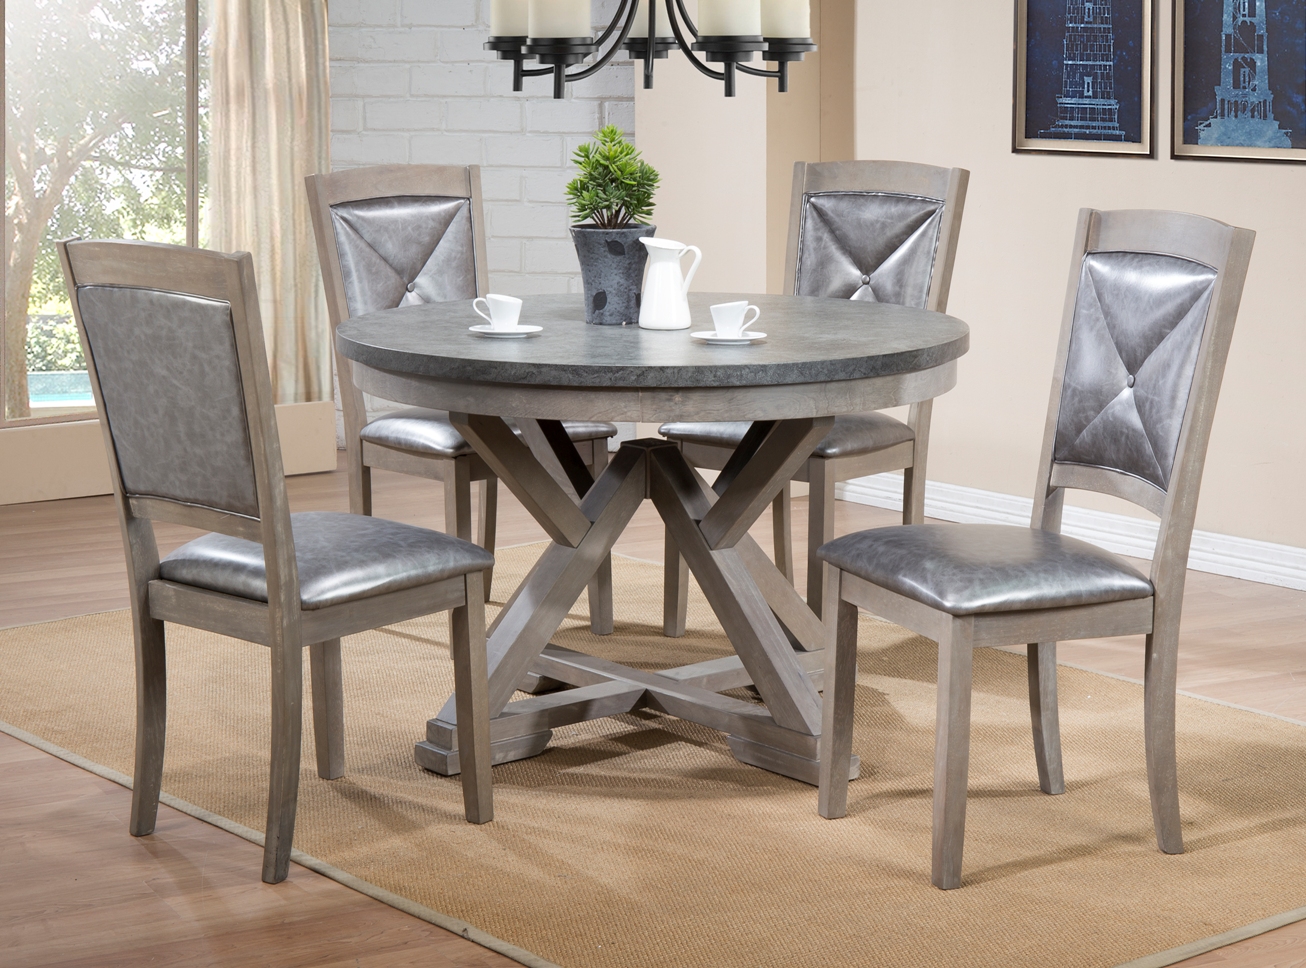 Brandy Dining Table With 4 Chairs Set Furniture Distribution Center